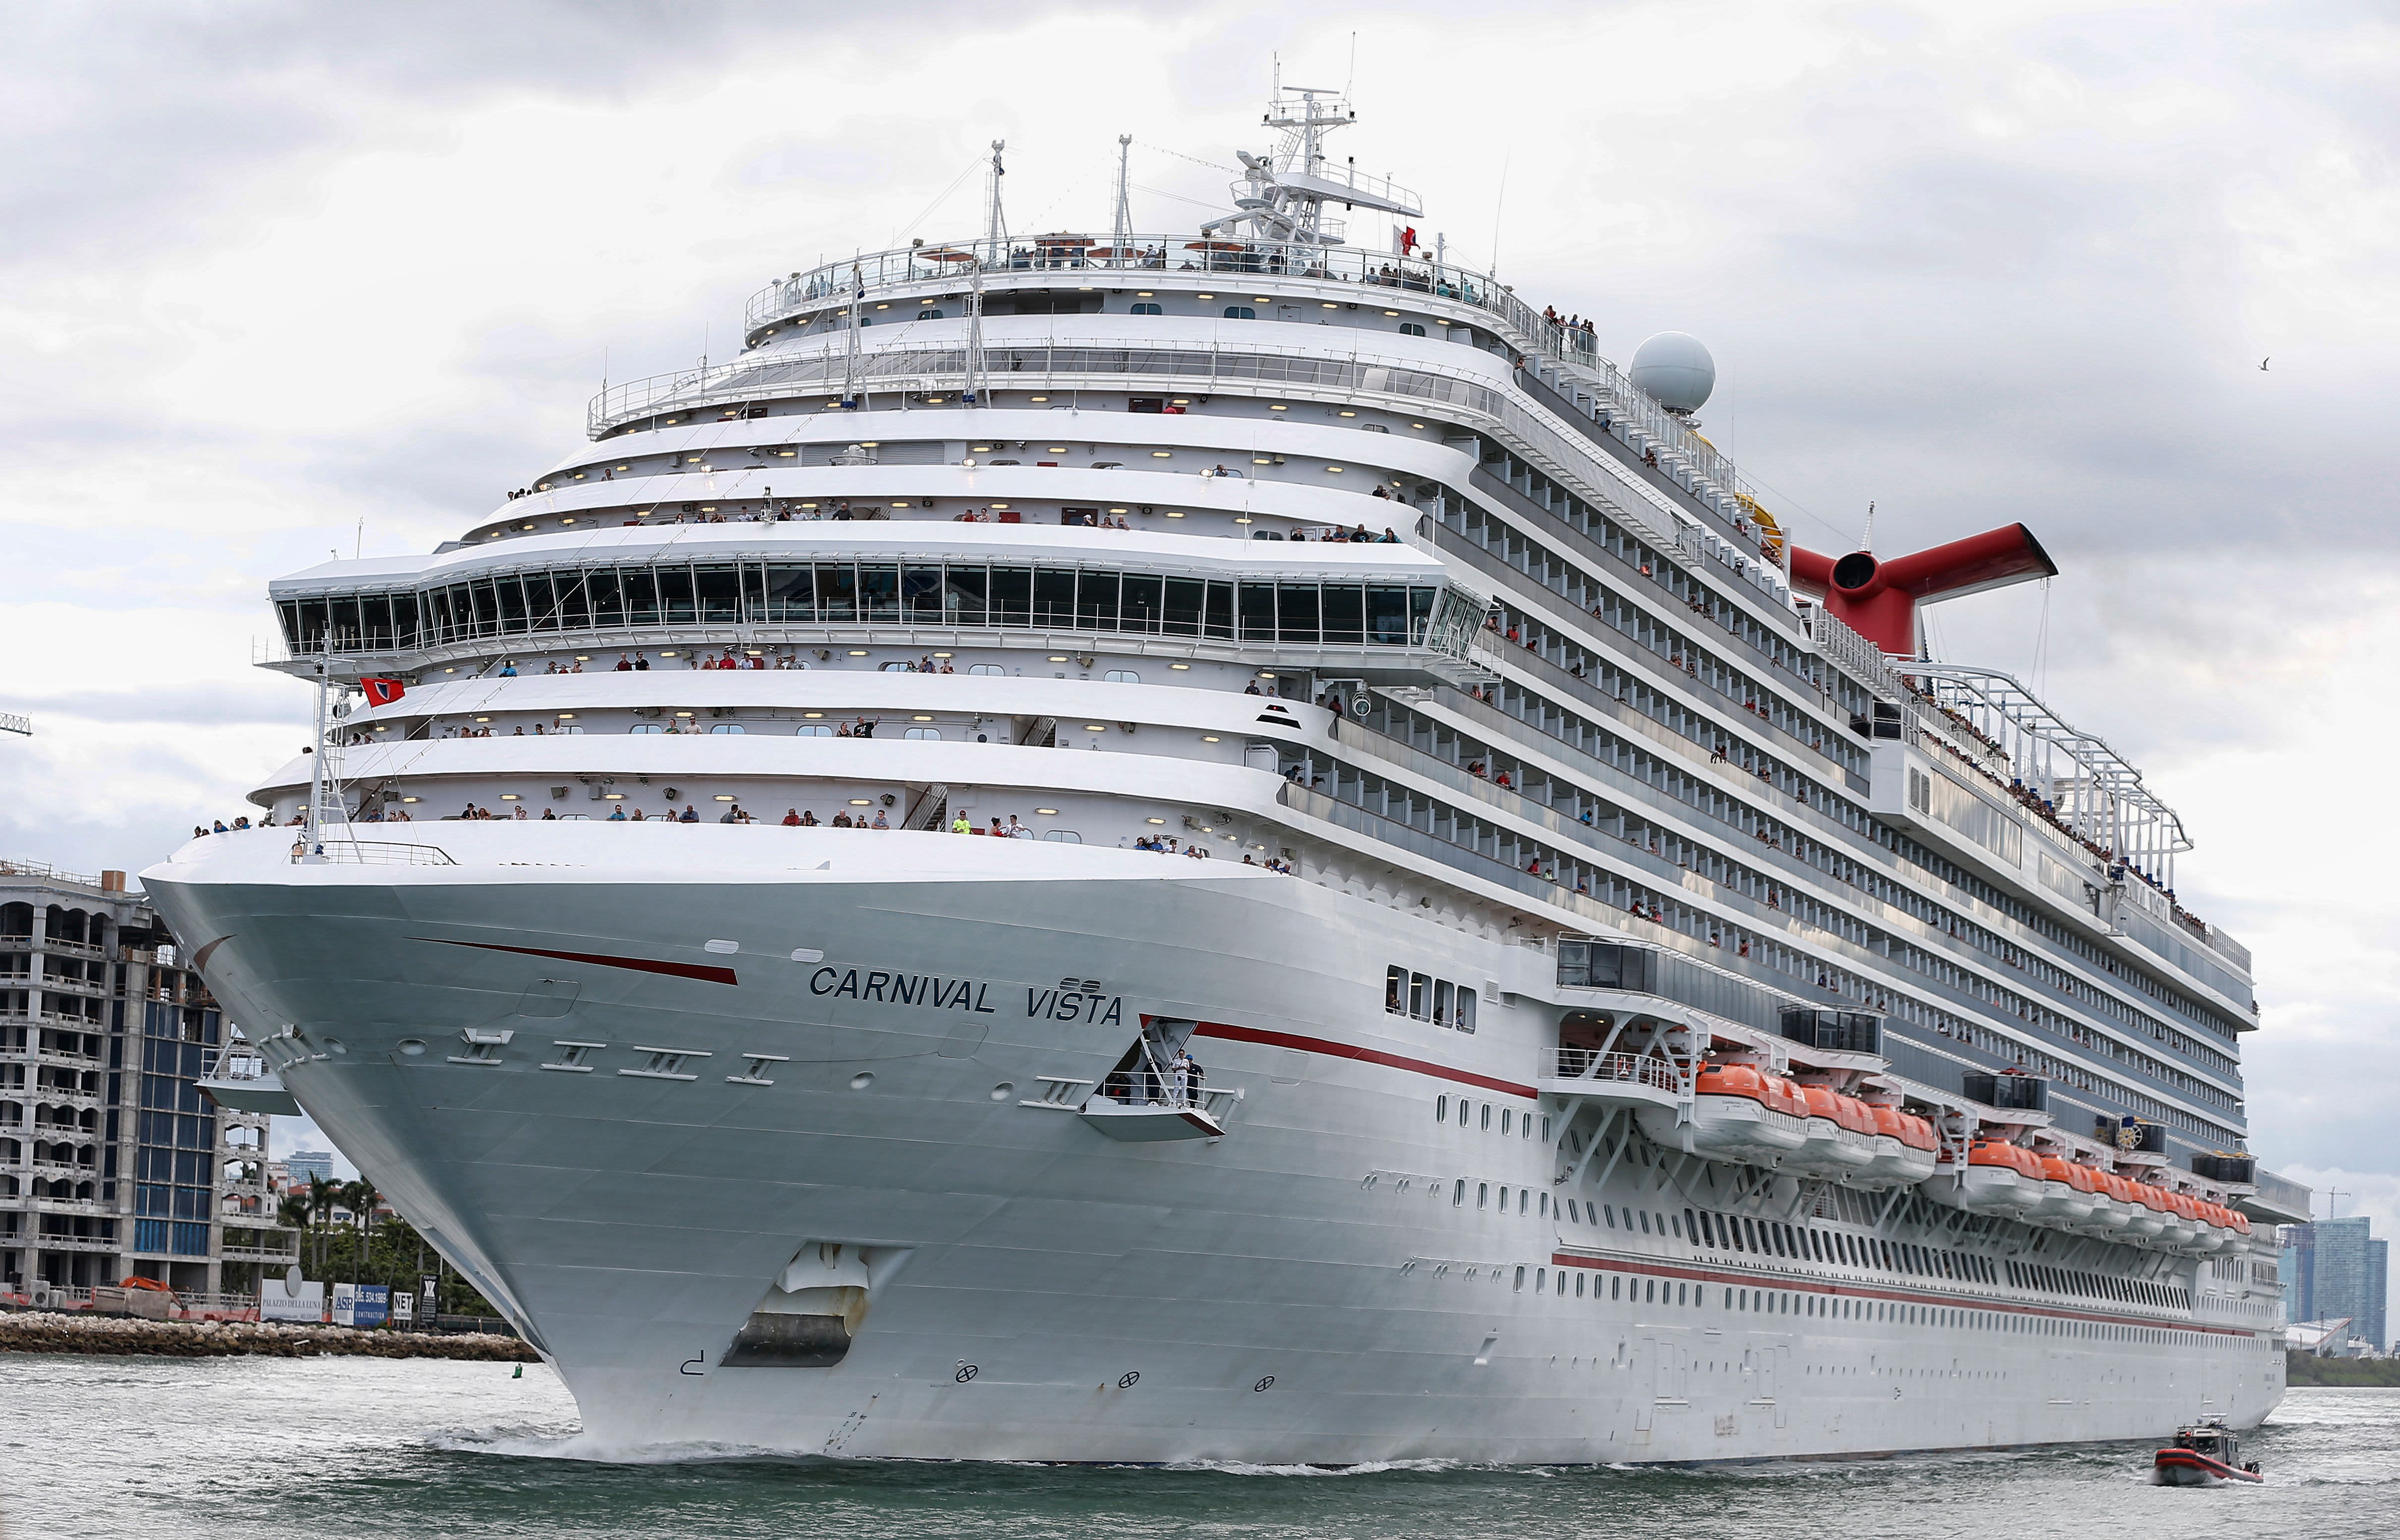 27 vaccinated people test positive for Covid on a Carnival cruise ship